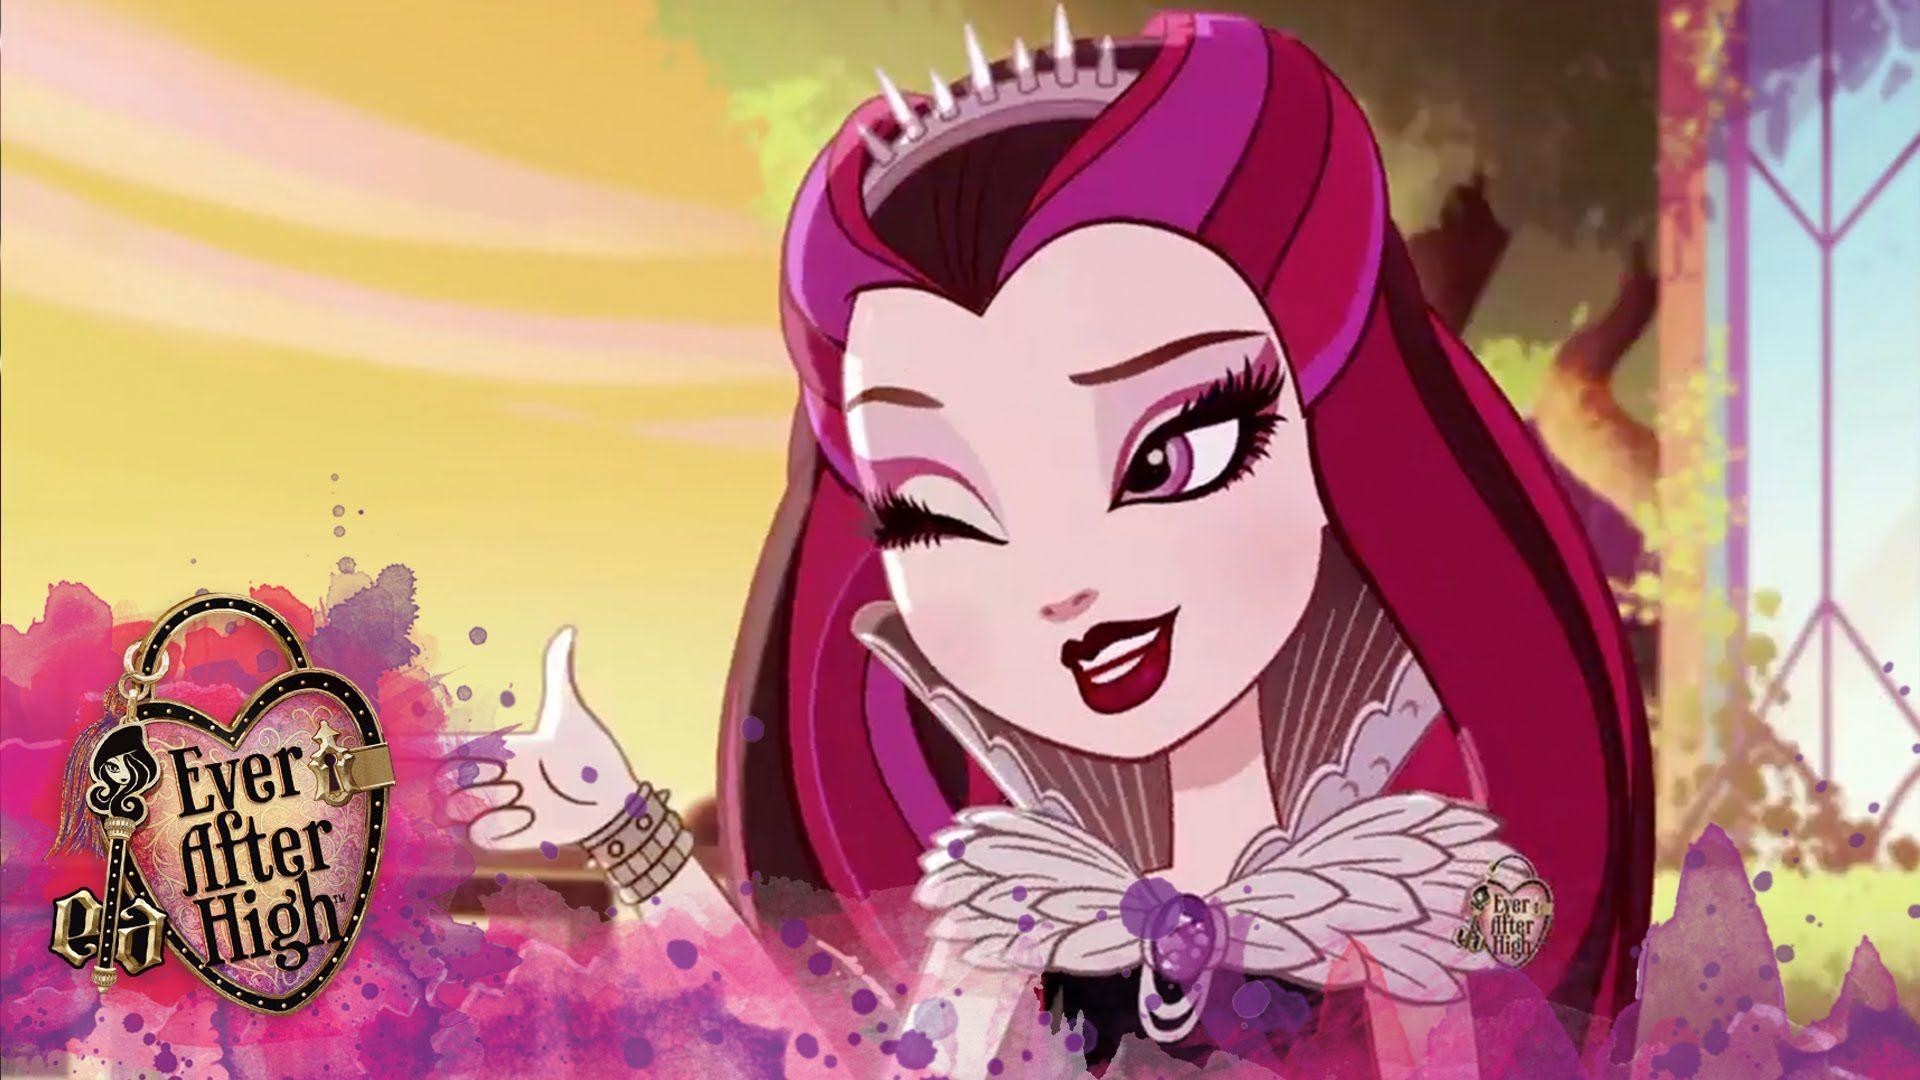 Ever after high Ever after Butterfly art